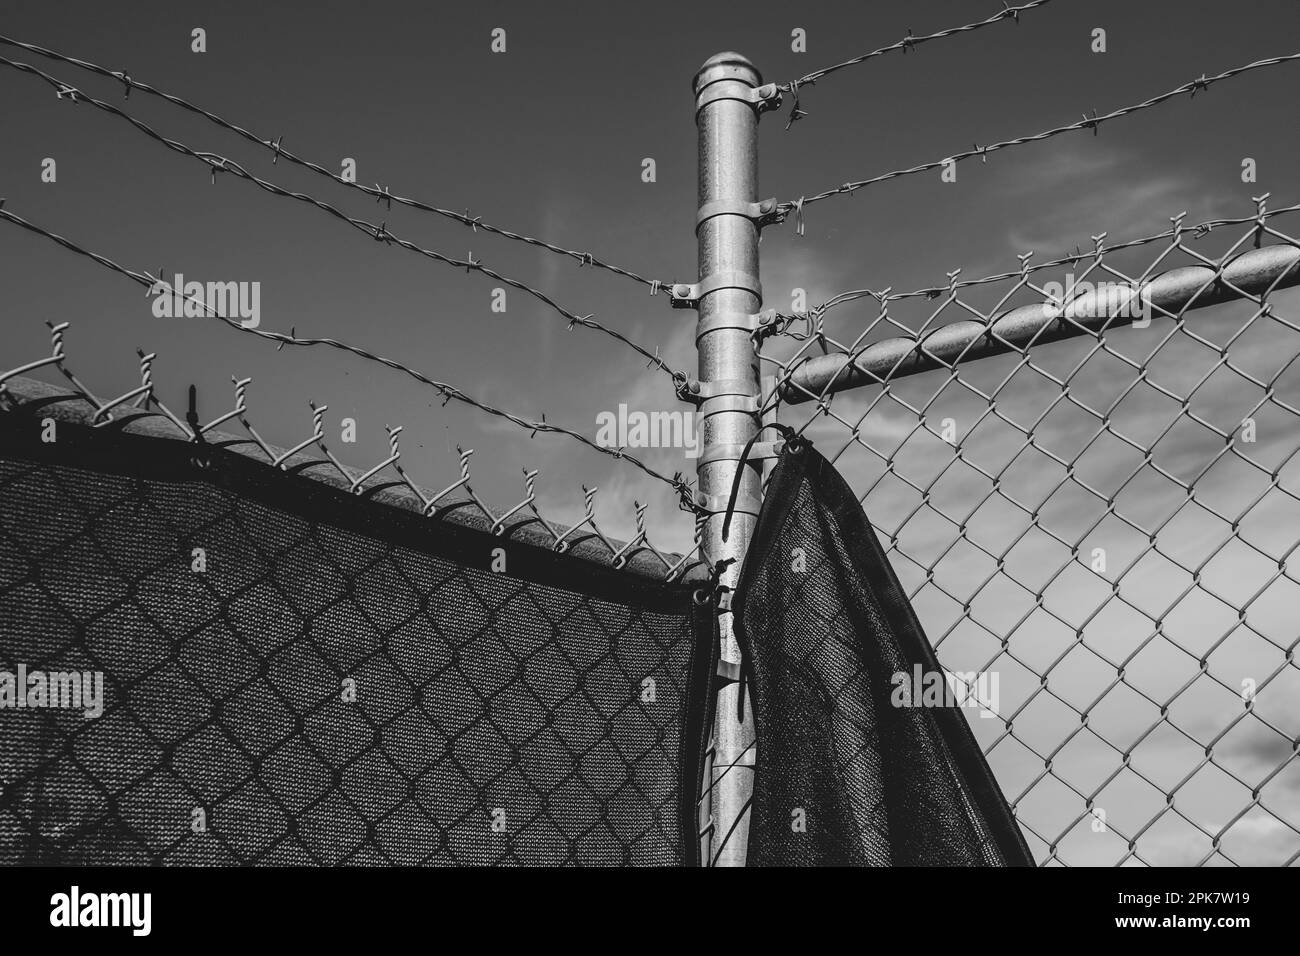 Stock photo of barbed wire fence and draped fabric. Stock Photo